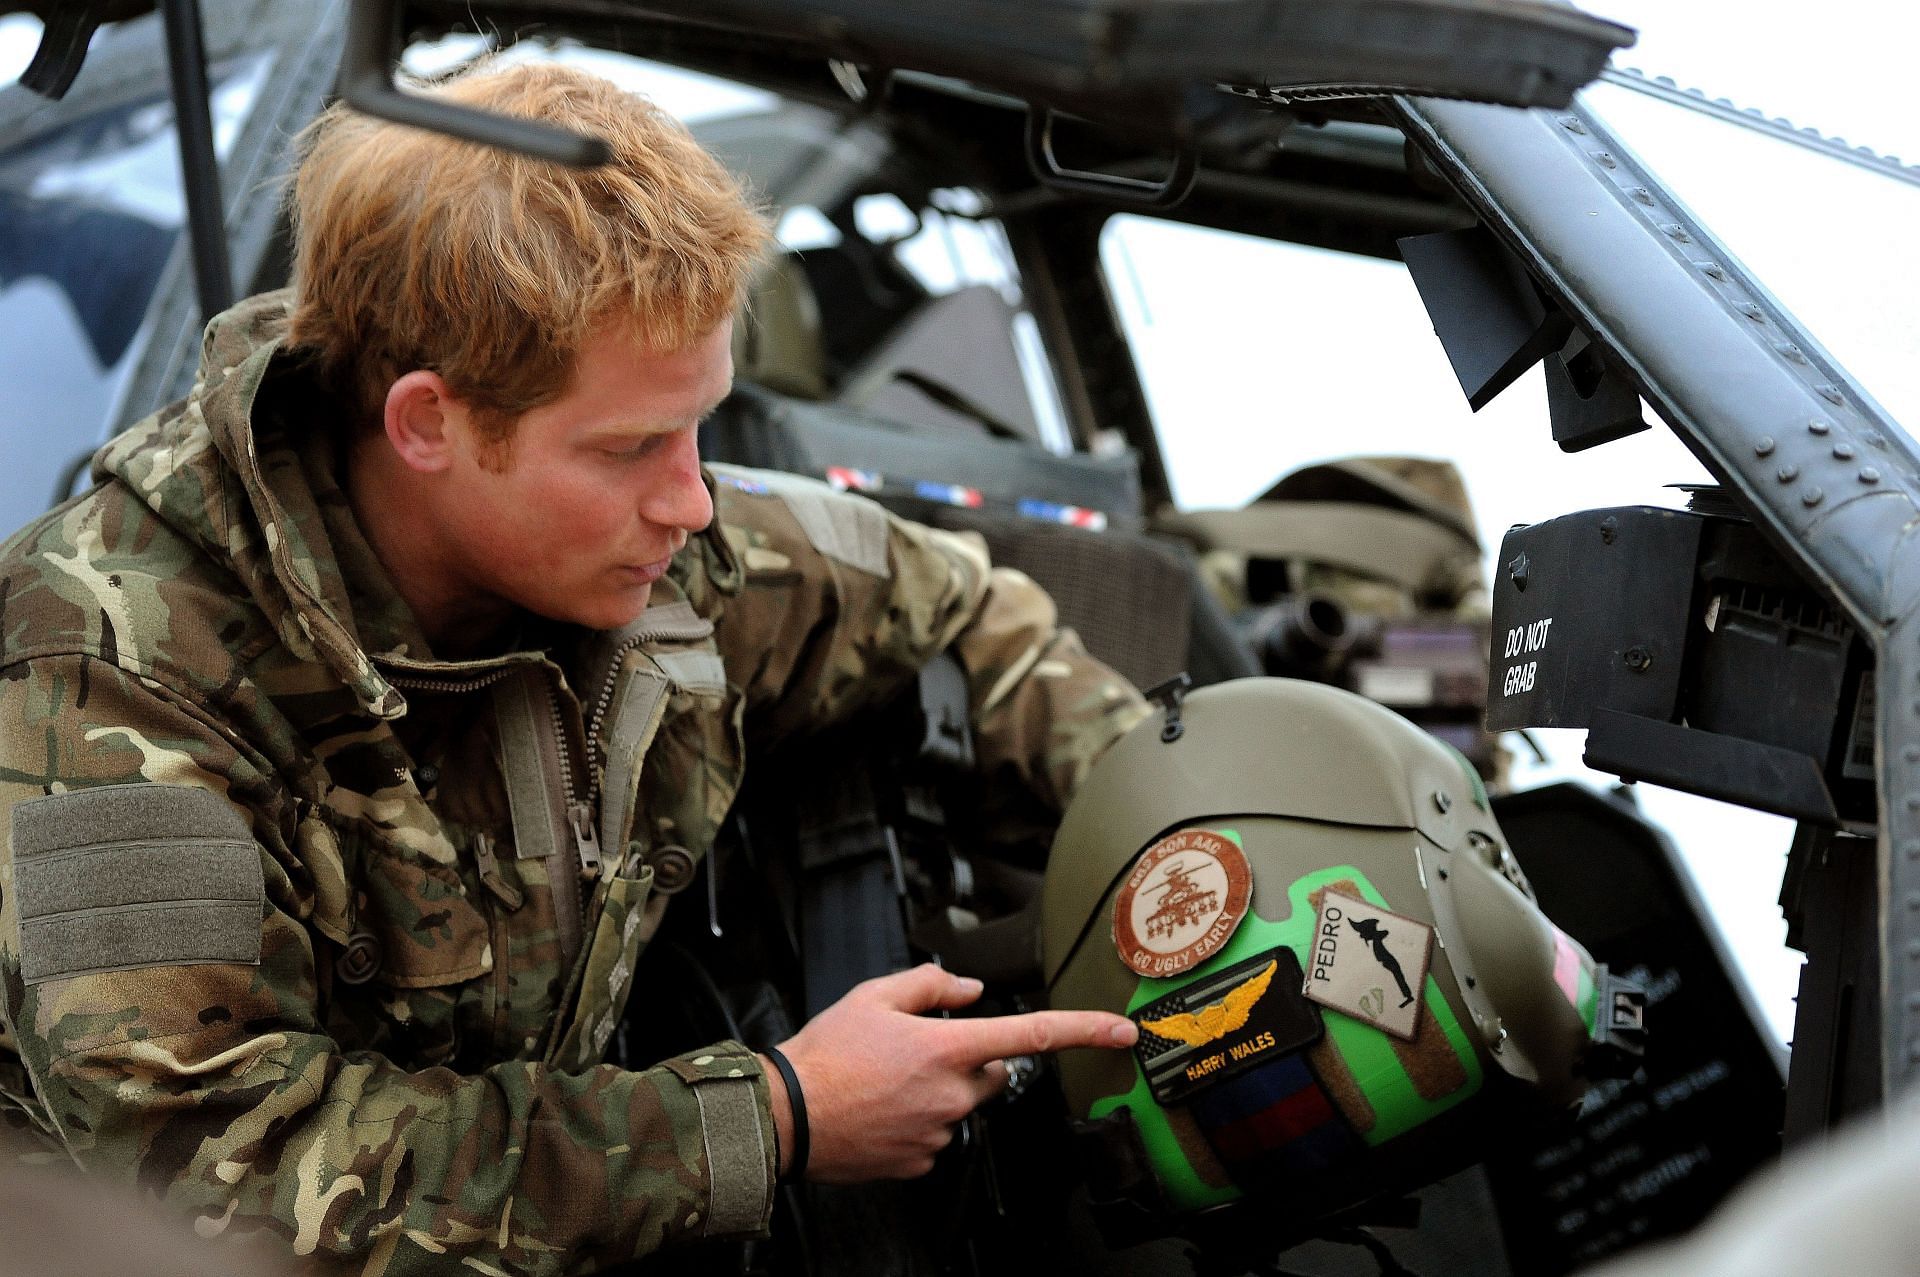 The Duke of Sussex in Afghanistan, December 2012 (Image by Getty Images/John Stillwell)